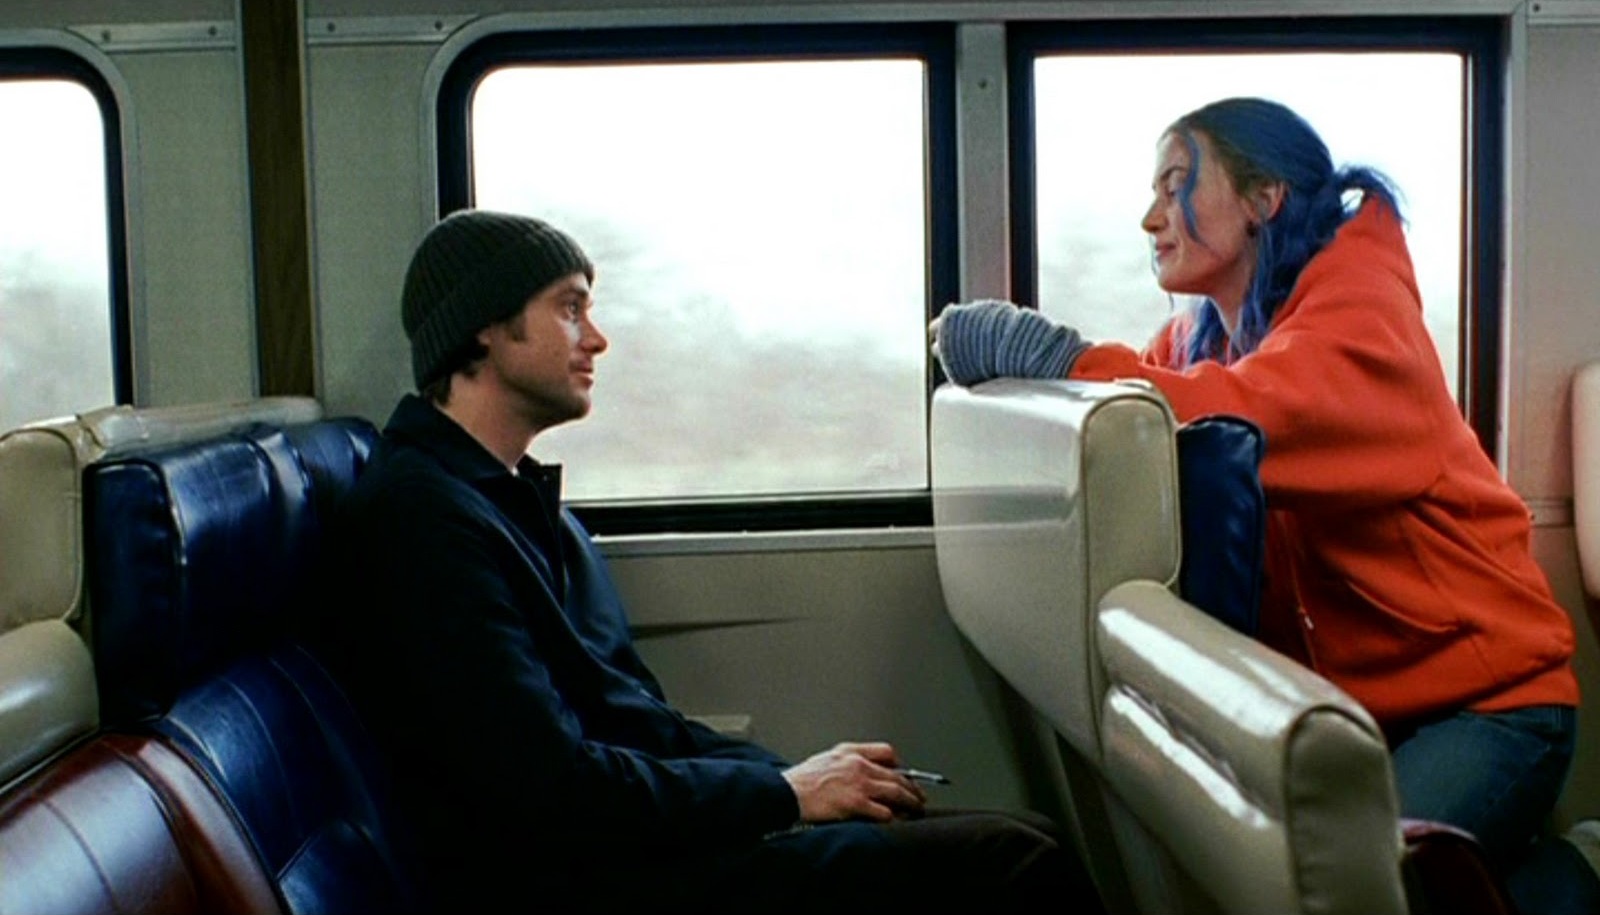 eternal sunshine of the spotless mind movie reviews